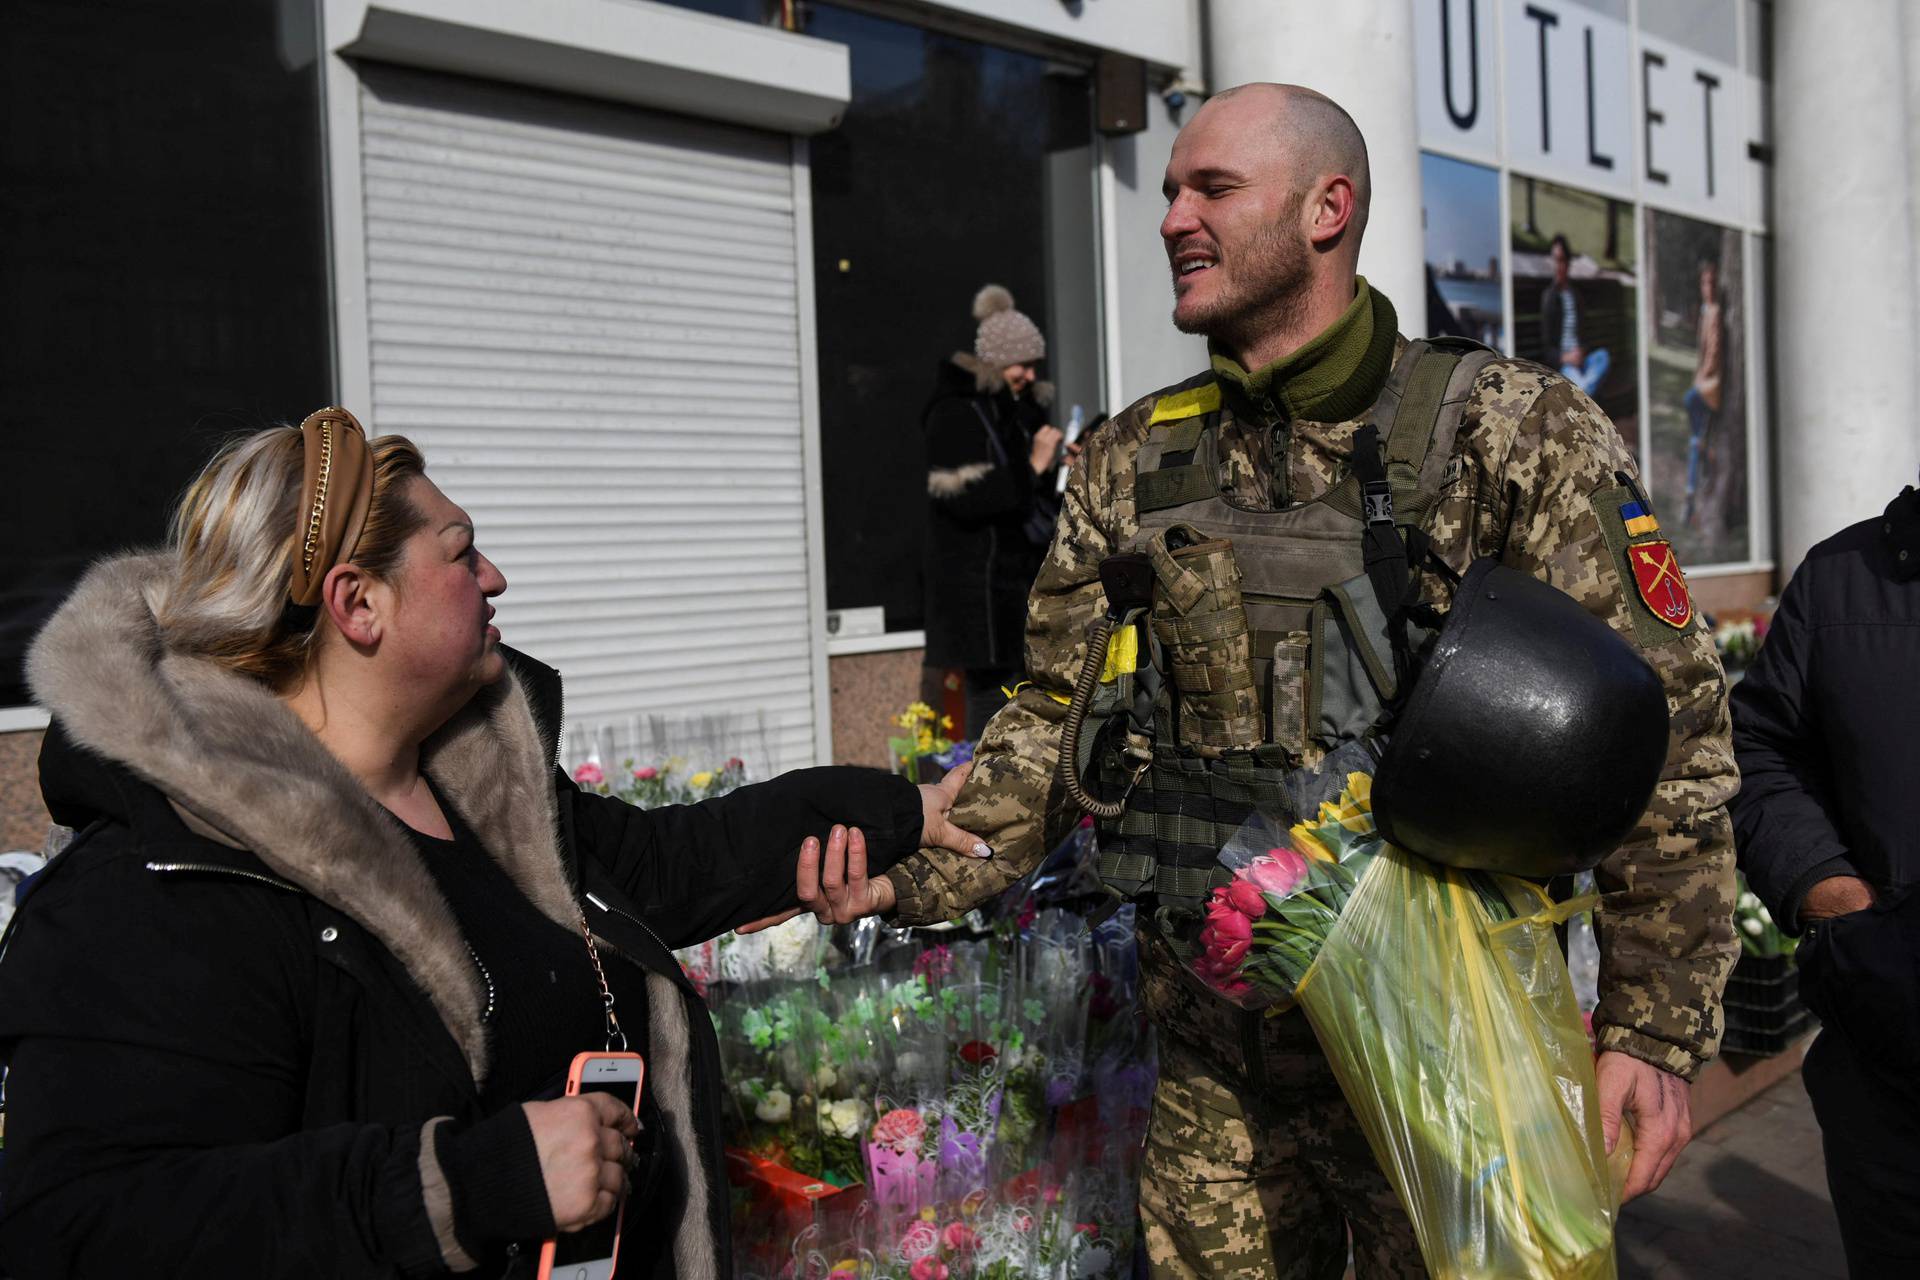 Ukrainian soldier Dmitriy, 32, is greeted by a woman after buying flowers at a street market, amid Russia's invasion of Ukraine, in Odessa